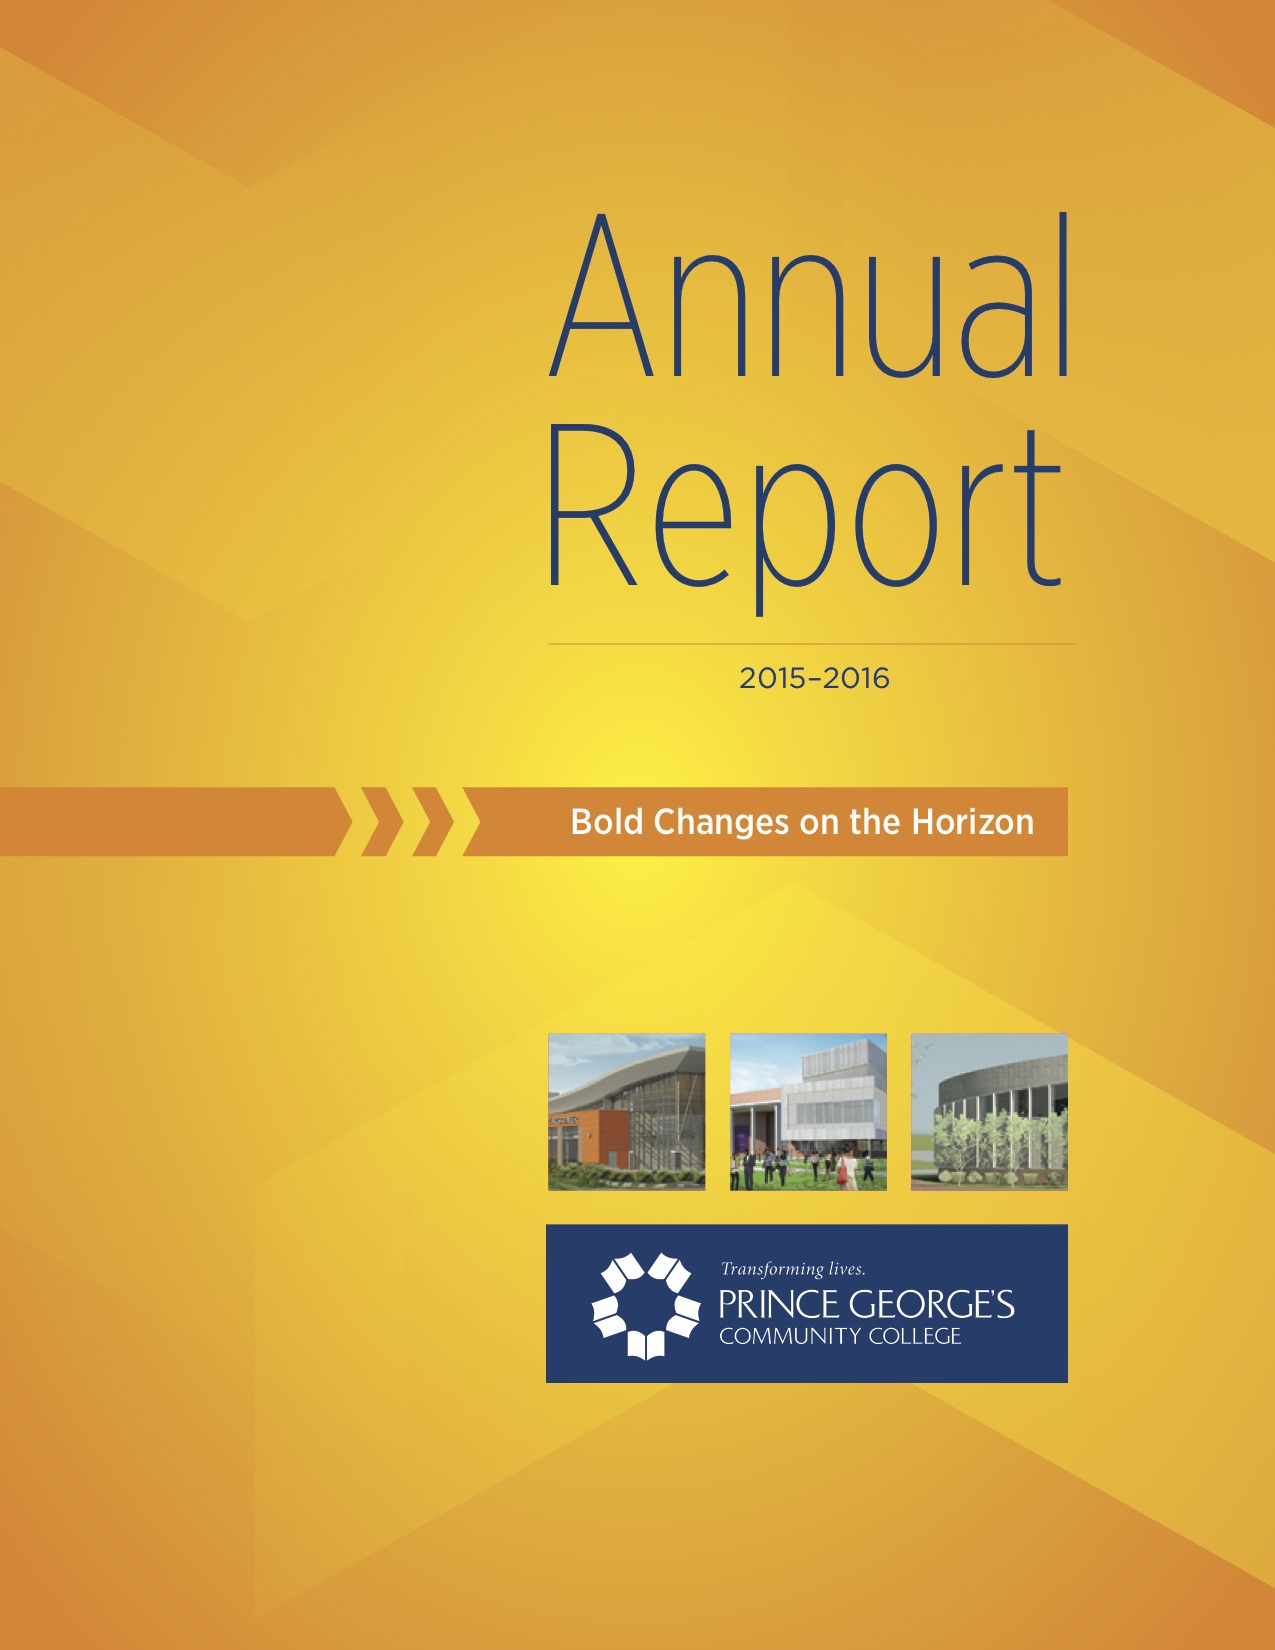 Prince George's Community College Annual Report